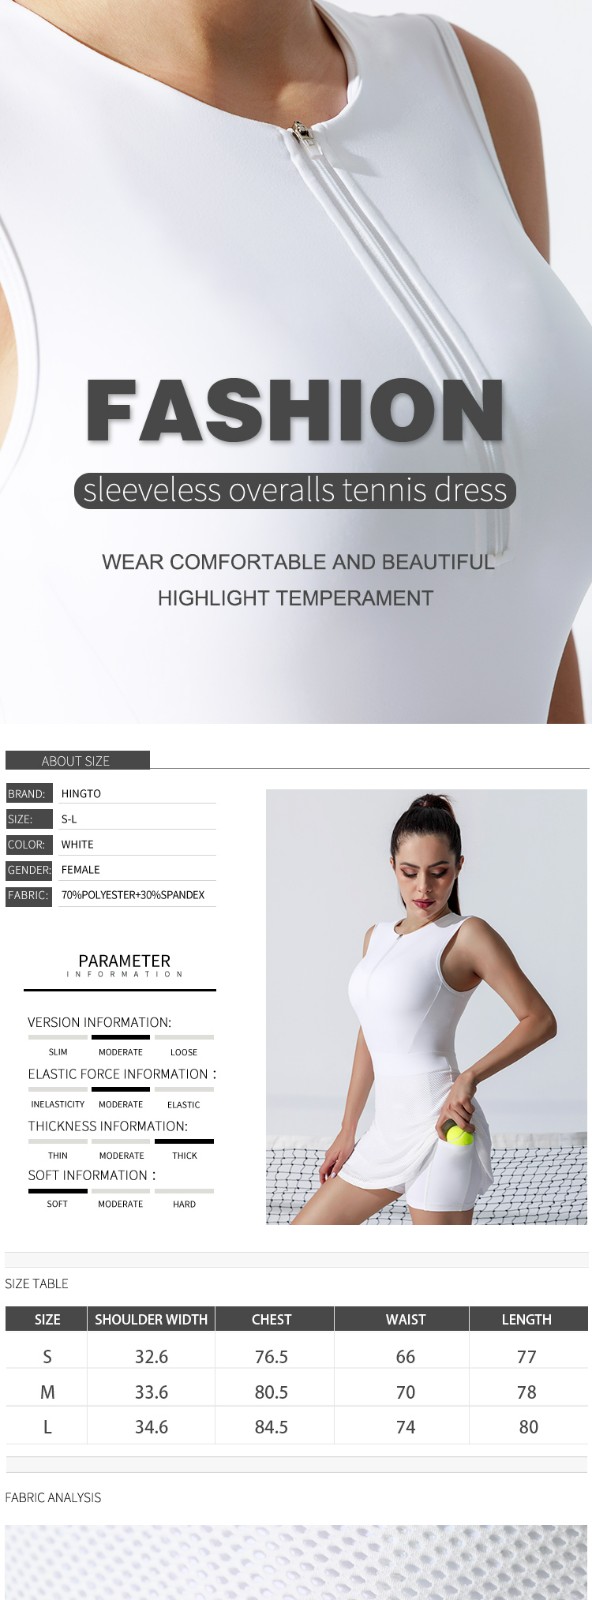 fashion woman tennis clothes experts for yoga-2